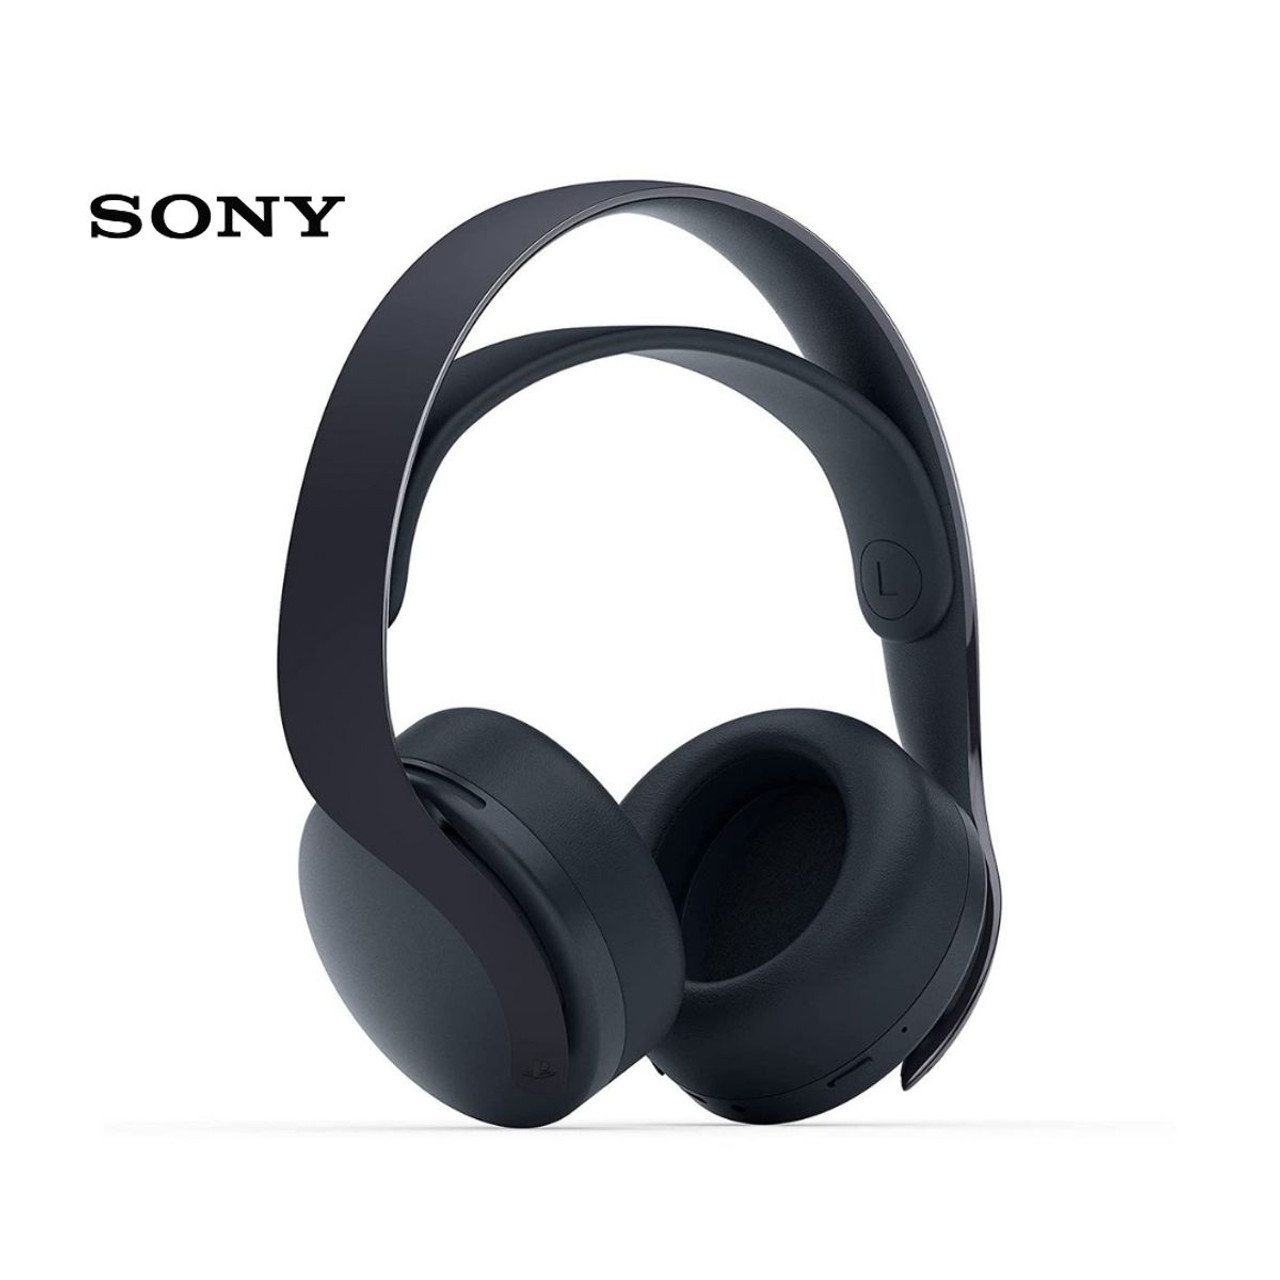 Sony PlayStation Pulse 3D Wireless Gaming Headset  product image